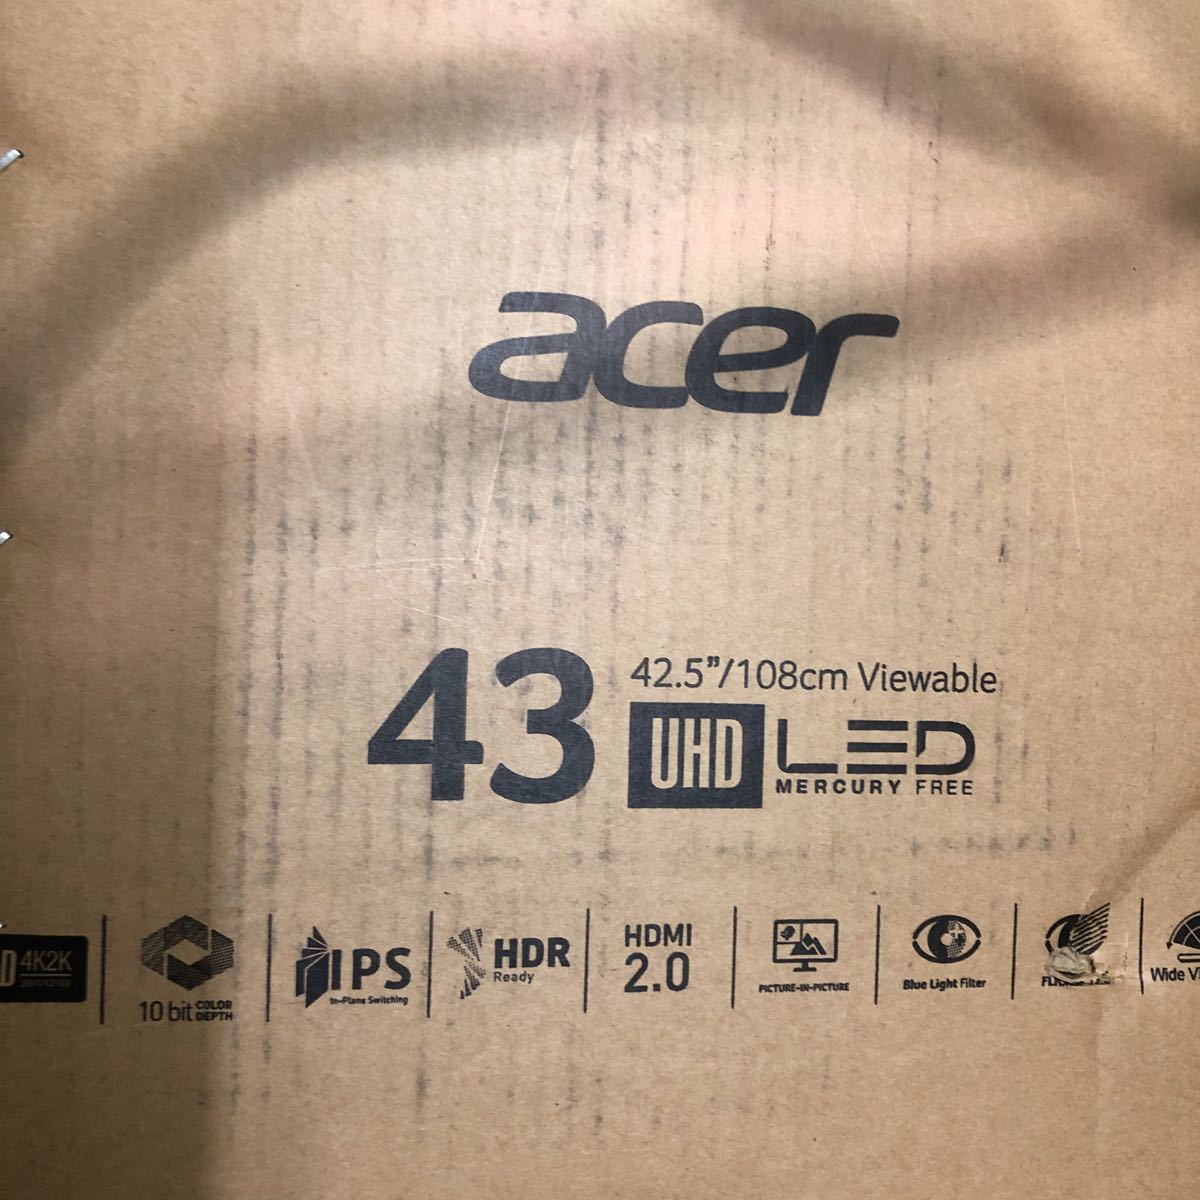  monitor display Acer 4K monitor HDMI terminal UHD 43 complete Junk part removing unused not yet verification 